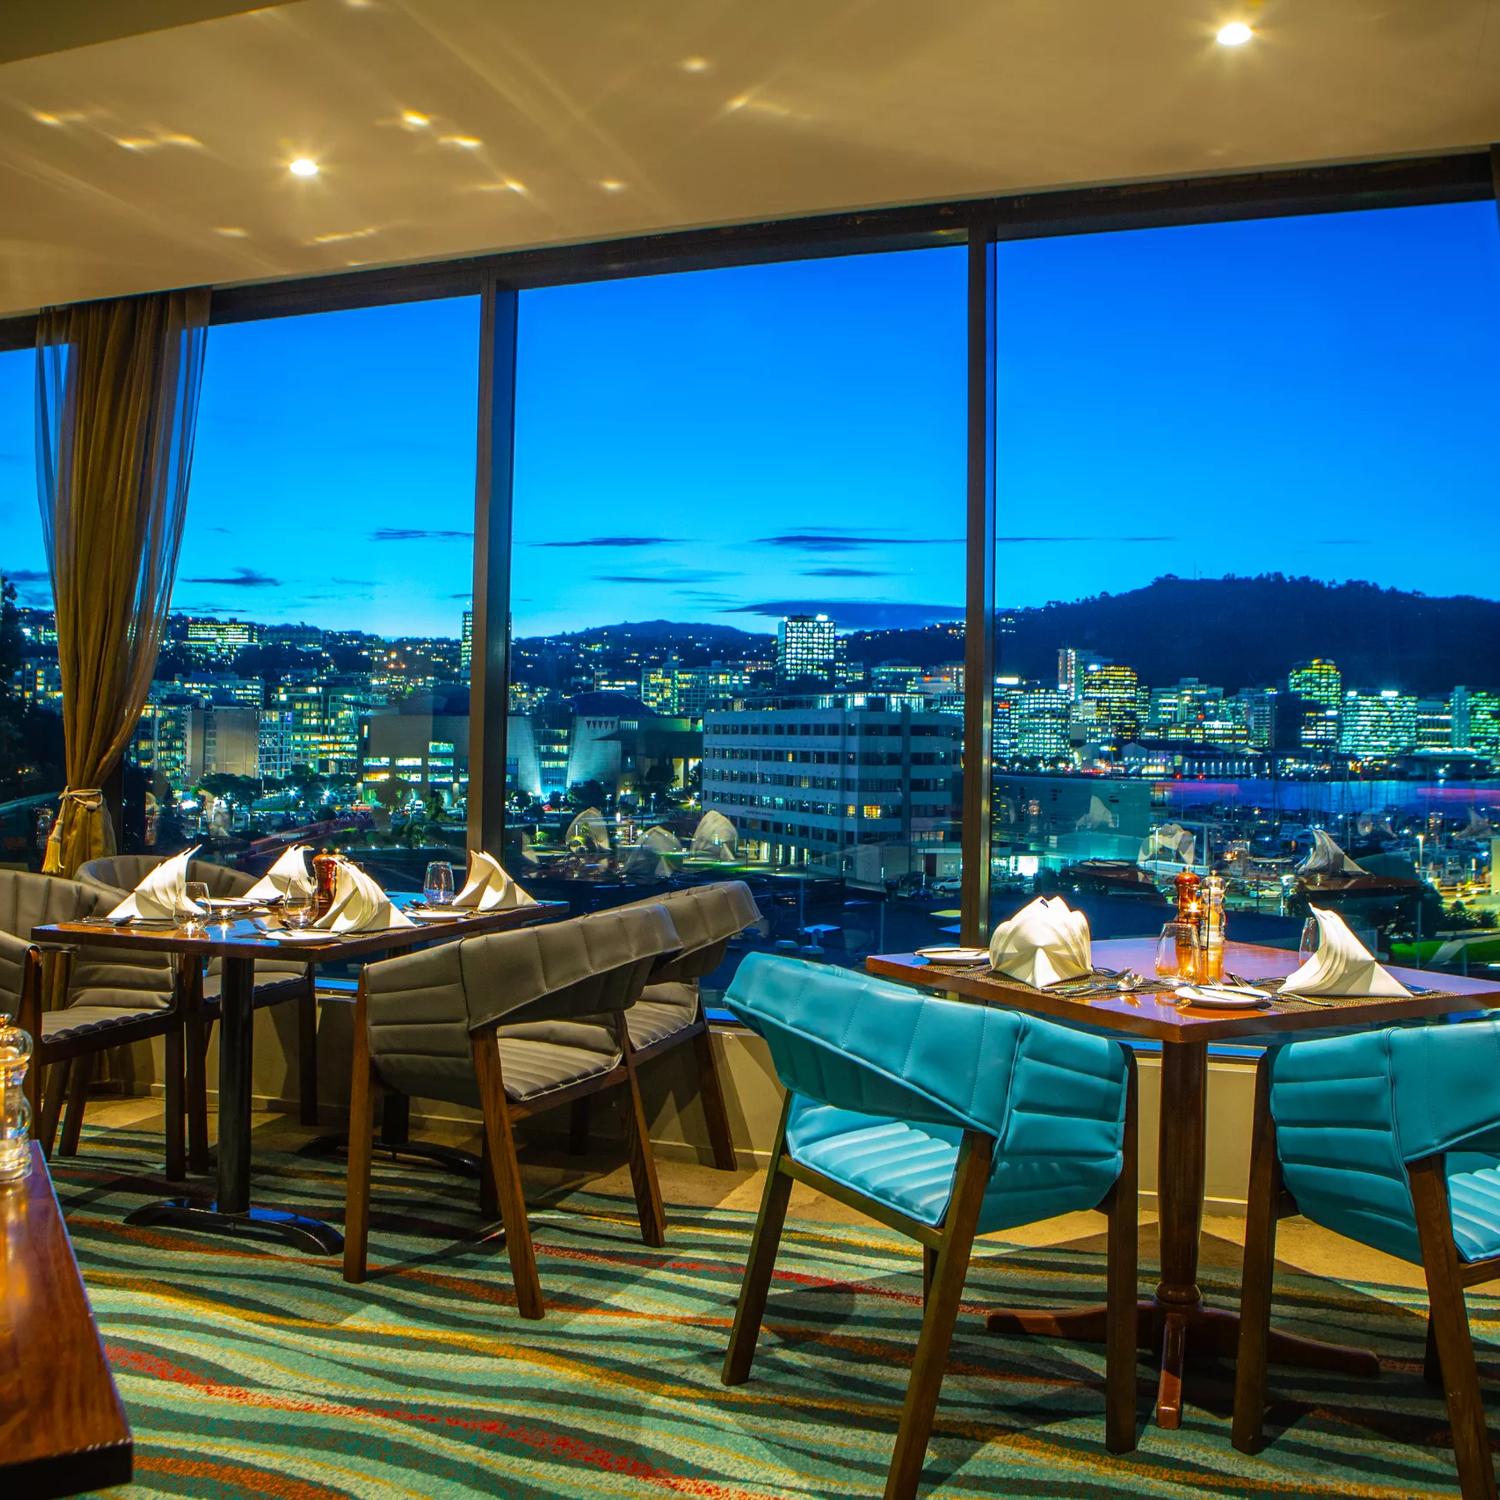 The Copthorne hotel dining room, chairs and tables overlook Wellington city at sunset through floor to ceiling windows.